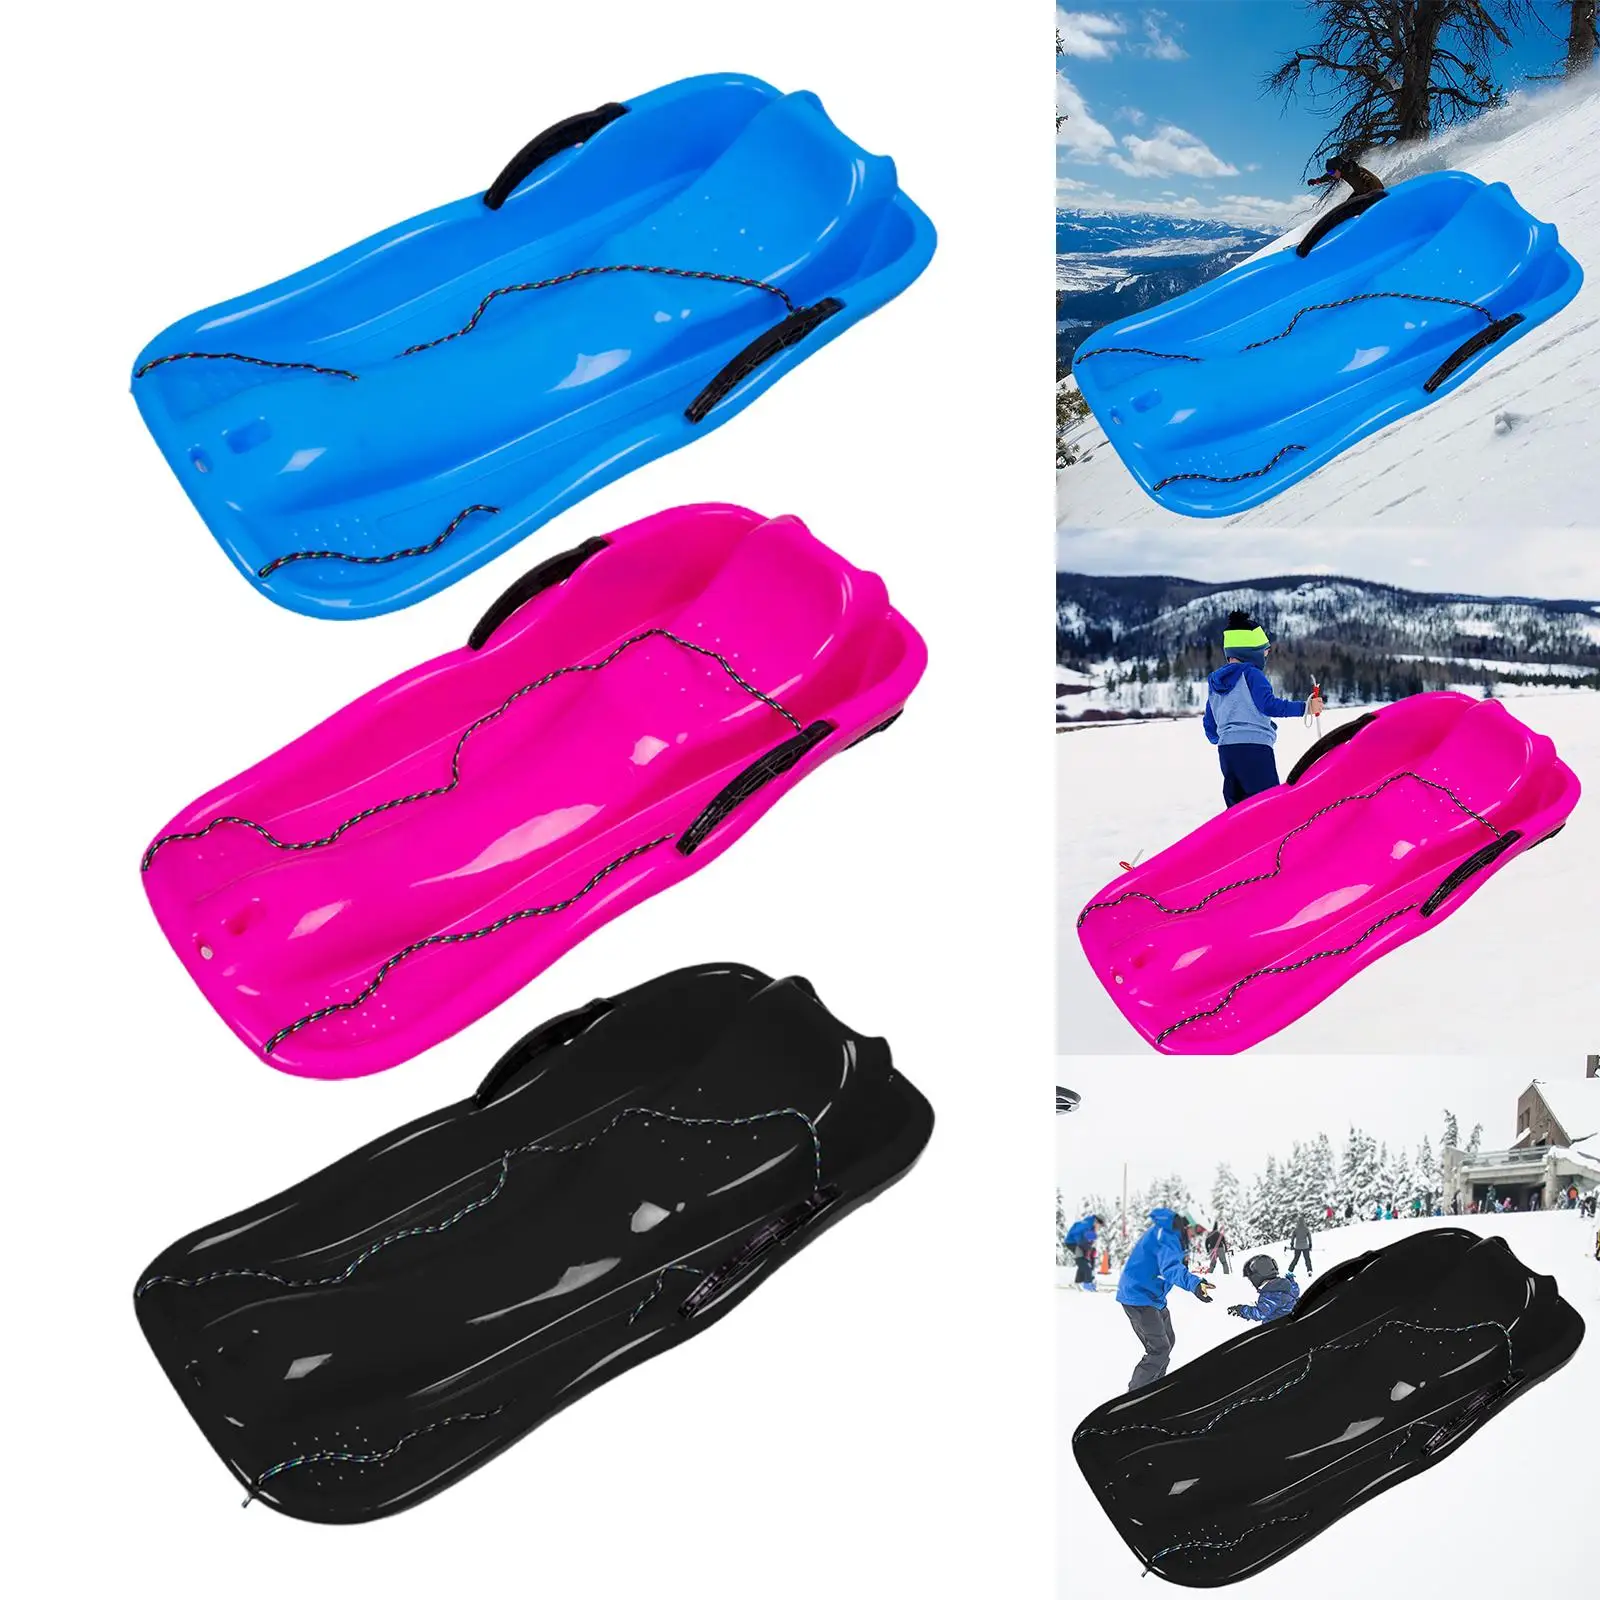 Winter Snow Sled, Human Sleigh Double Sleigh for Kids with Double Seat, Ski